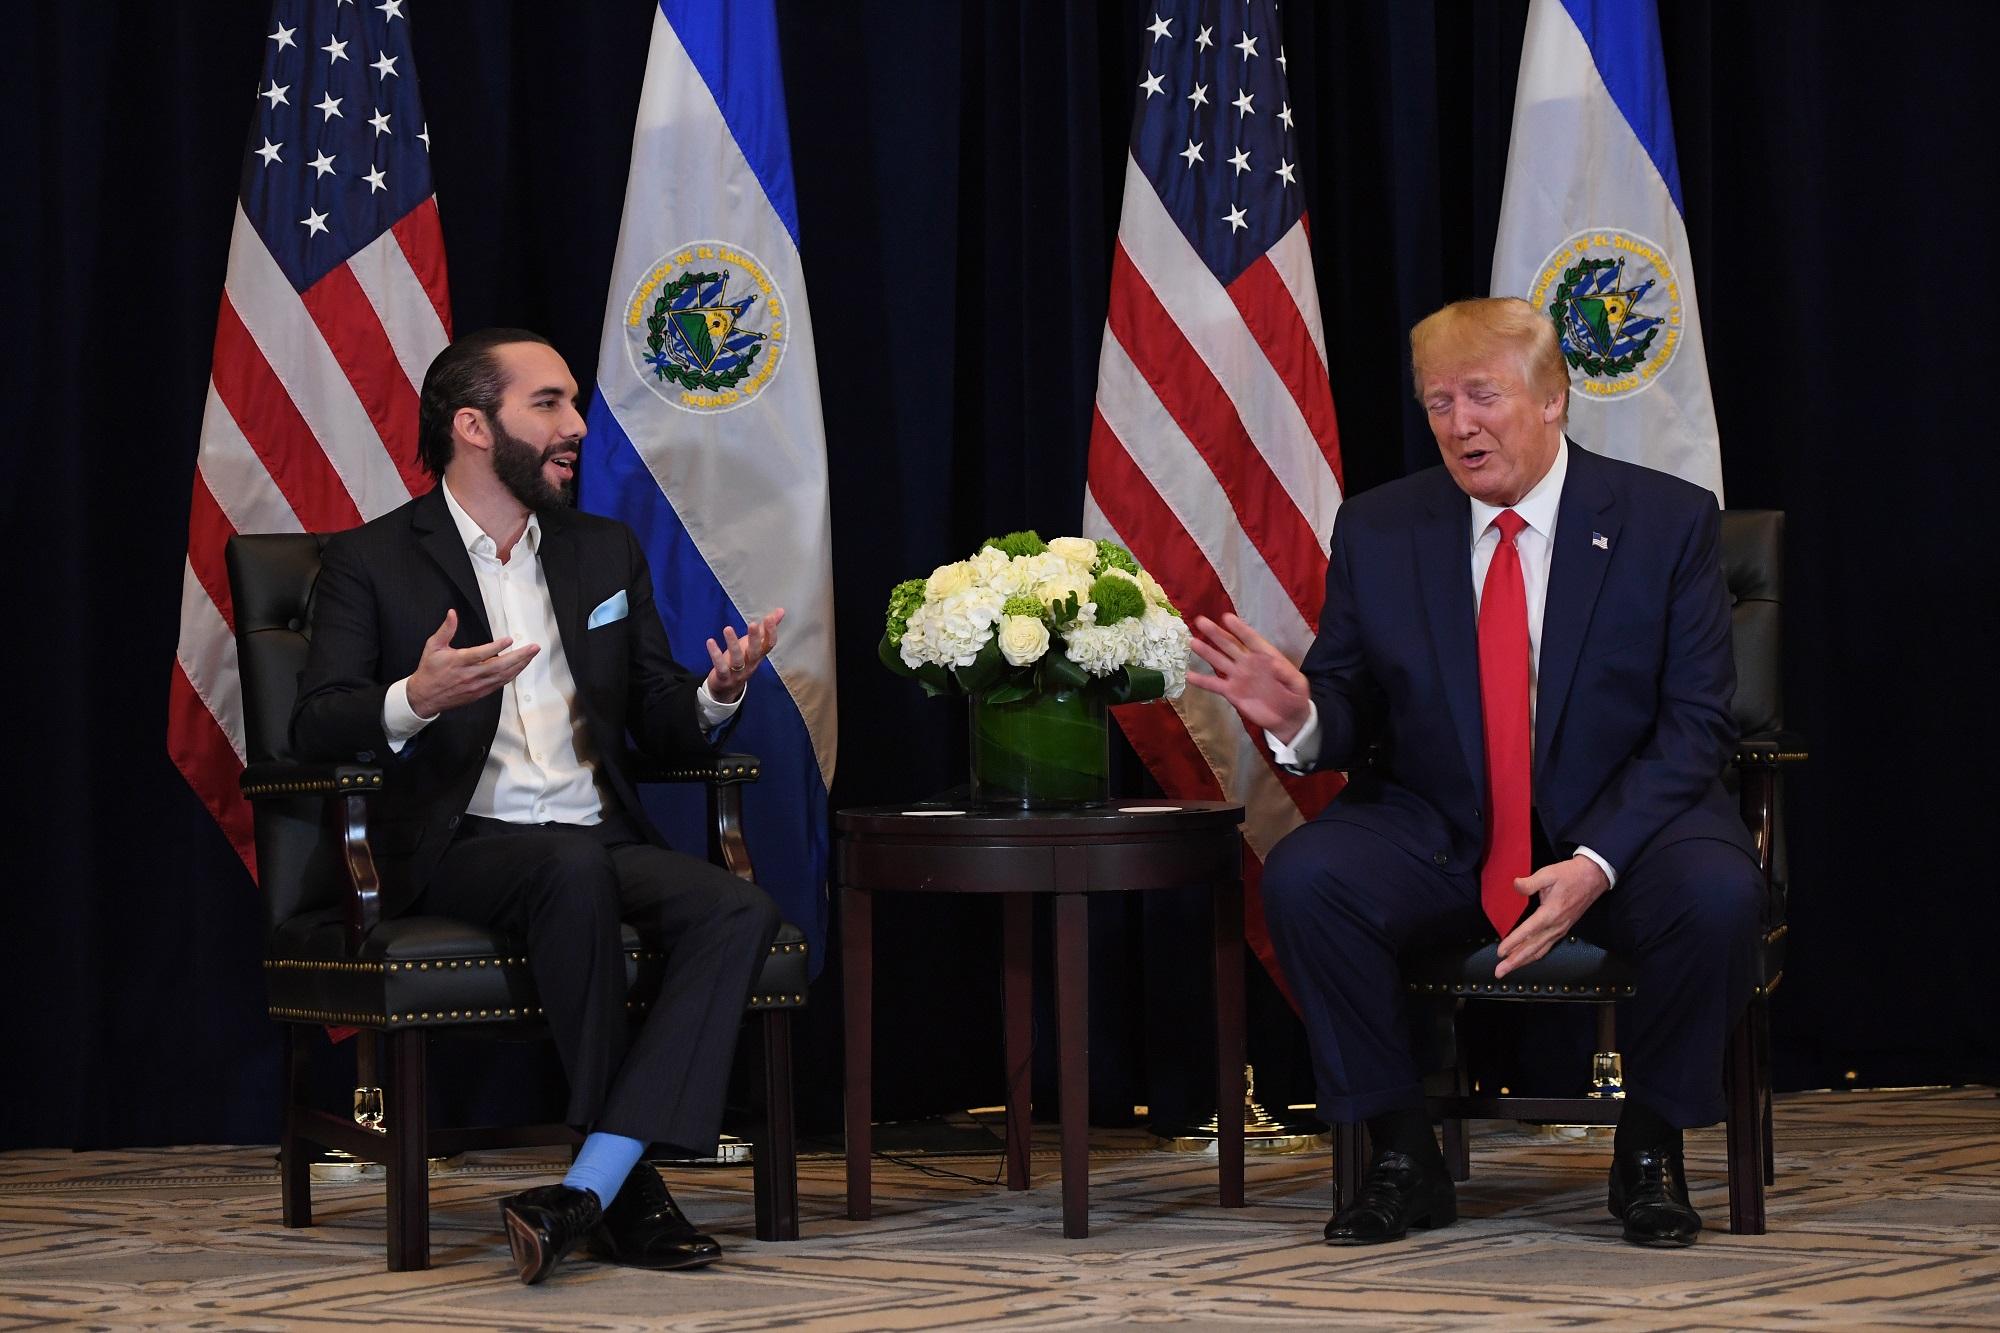 U.S. President Donald Trump and President Nayib Bukele of El Salvador hold a meeting in New York, on September 25, 2019, on the sidelines fofo the United Nations General Assembly. Photo Saul Loeb/AFP